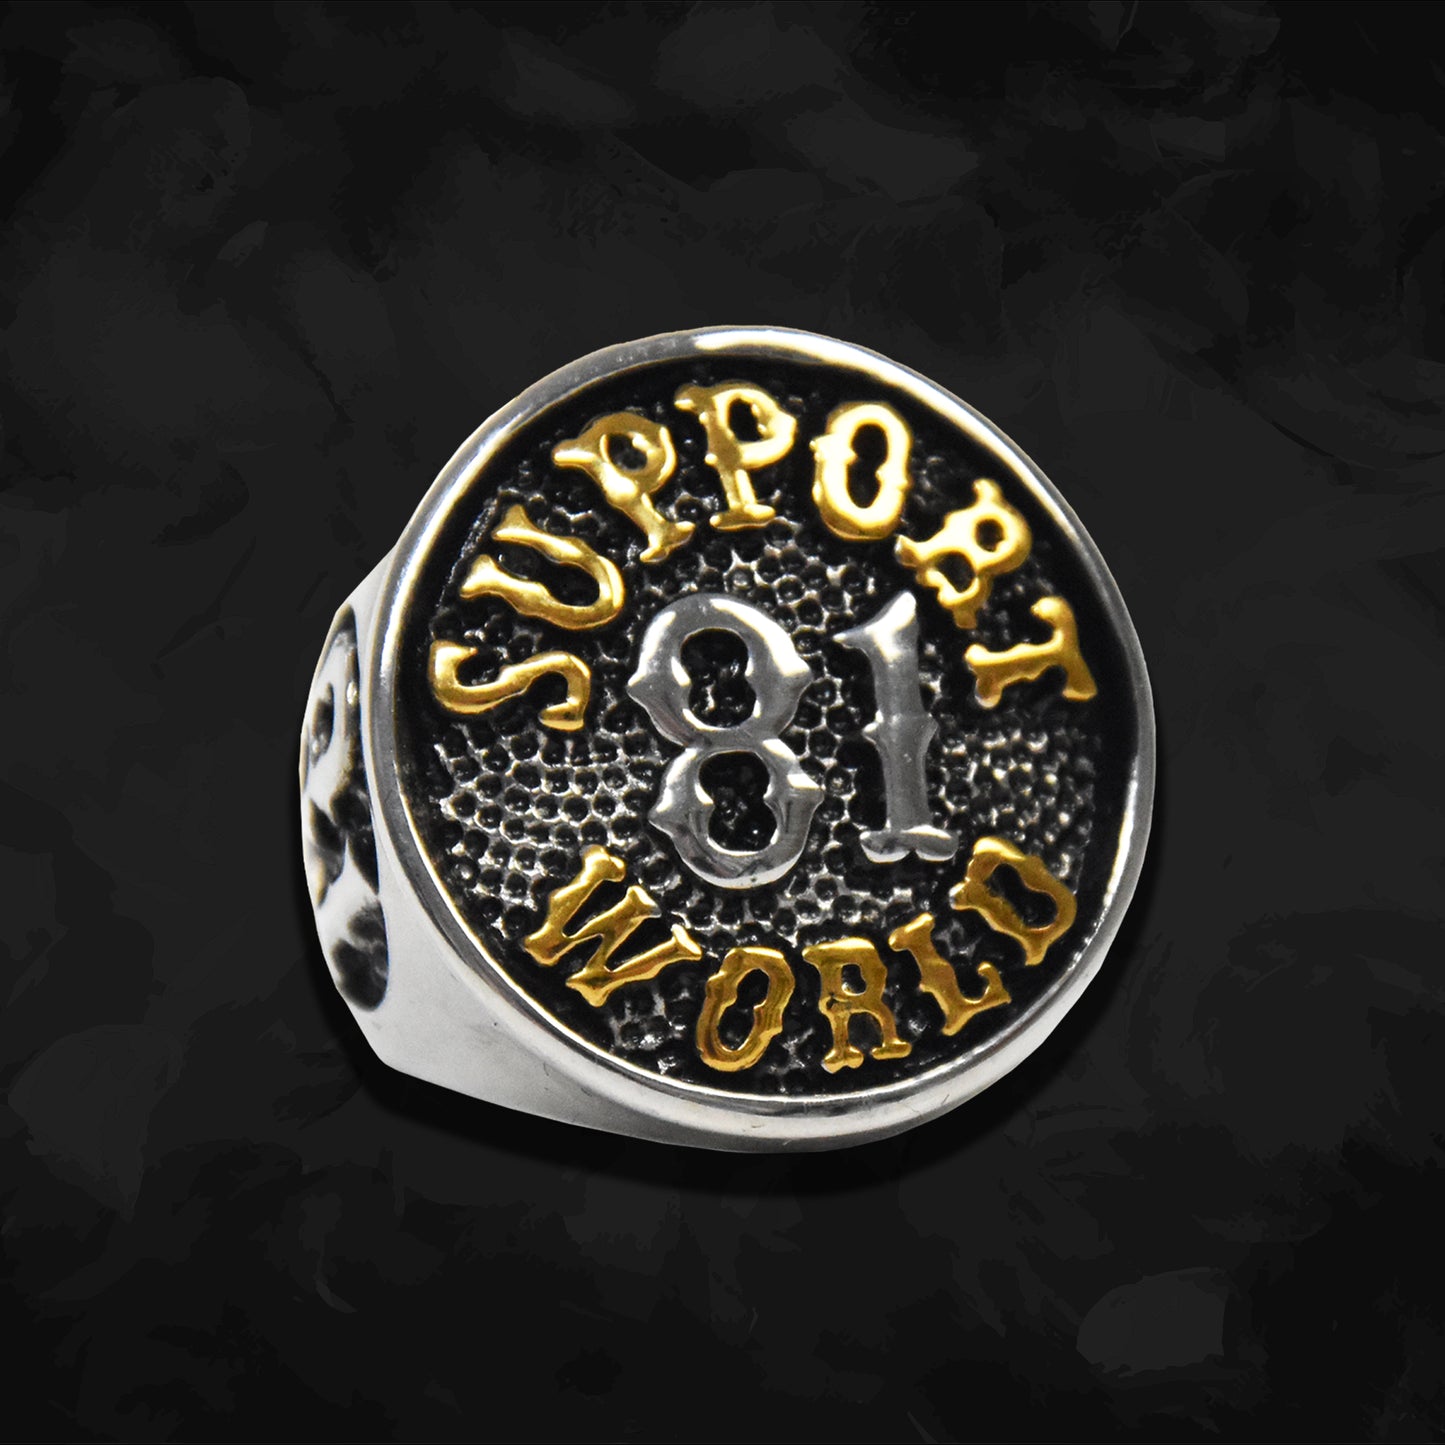 RING "SUPPORT 81 WORLD" - GOLD